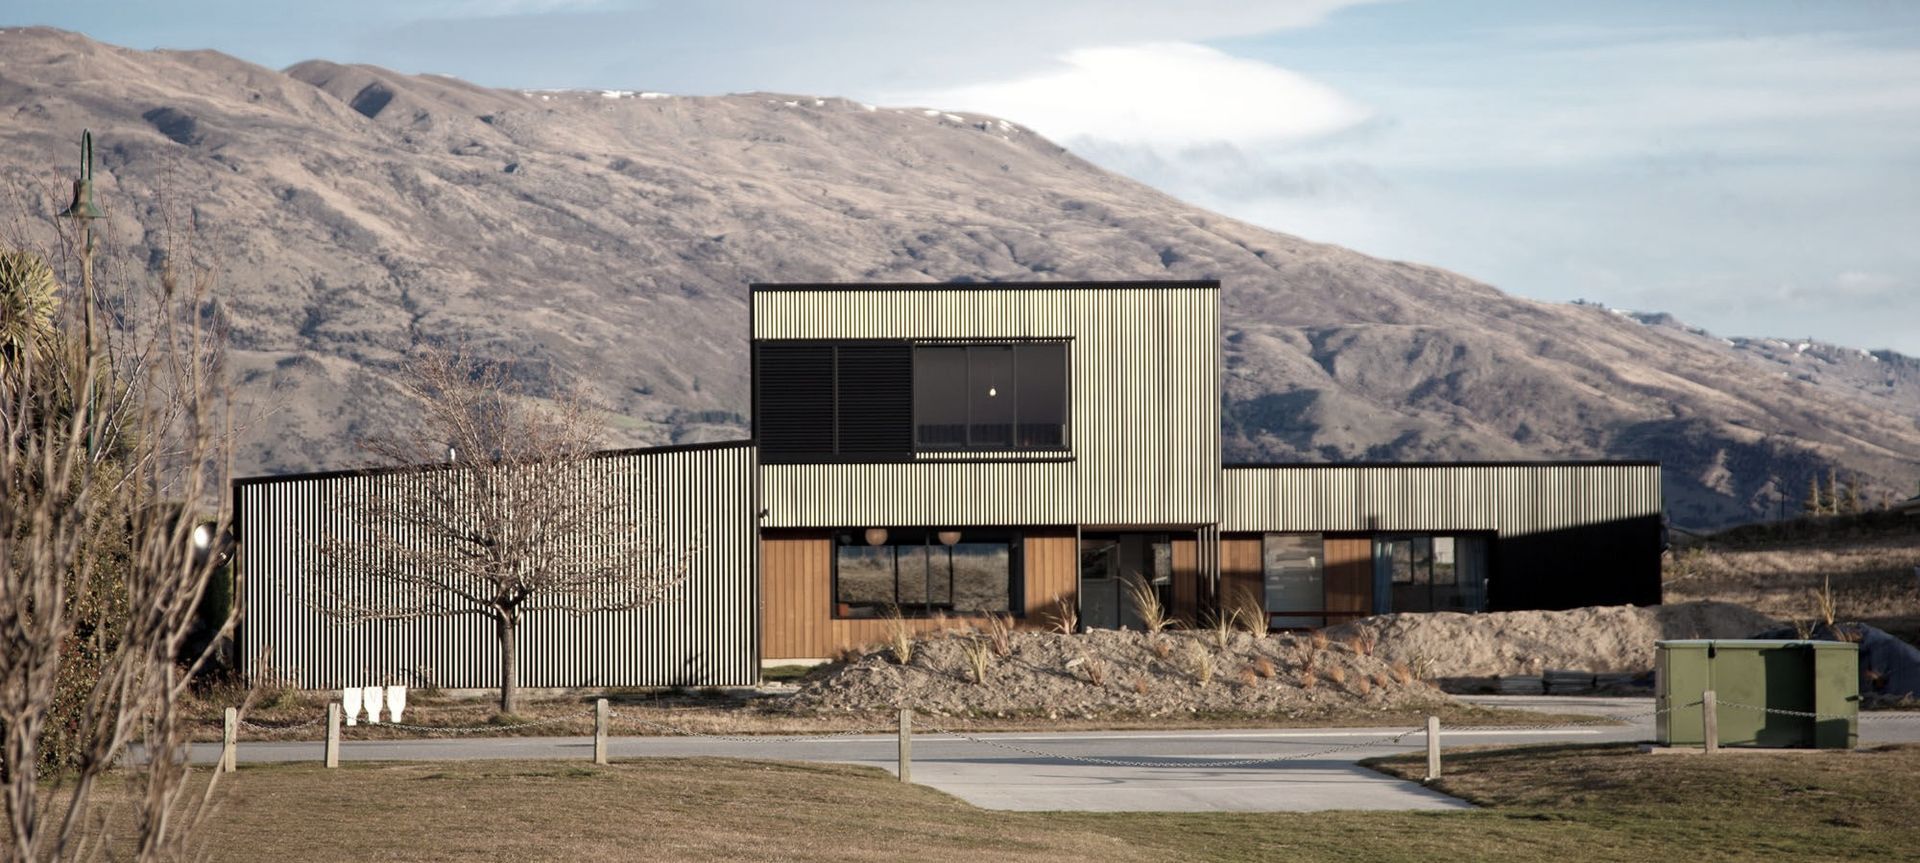 Acland House | Rafe McLean Architects banner